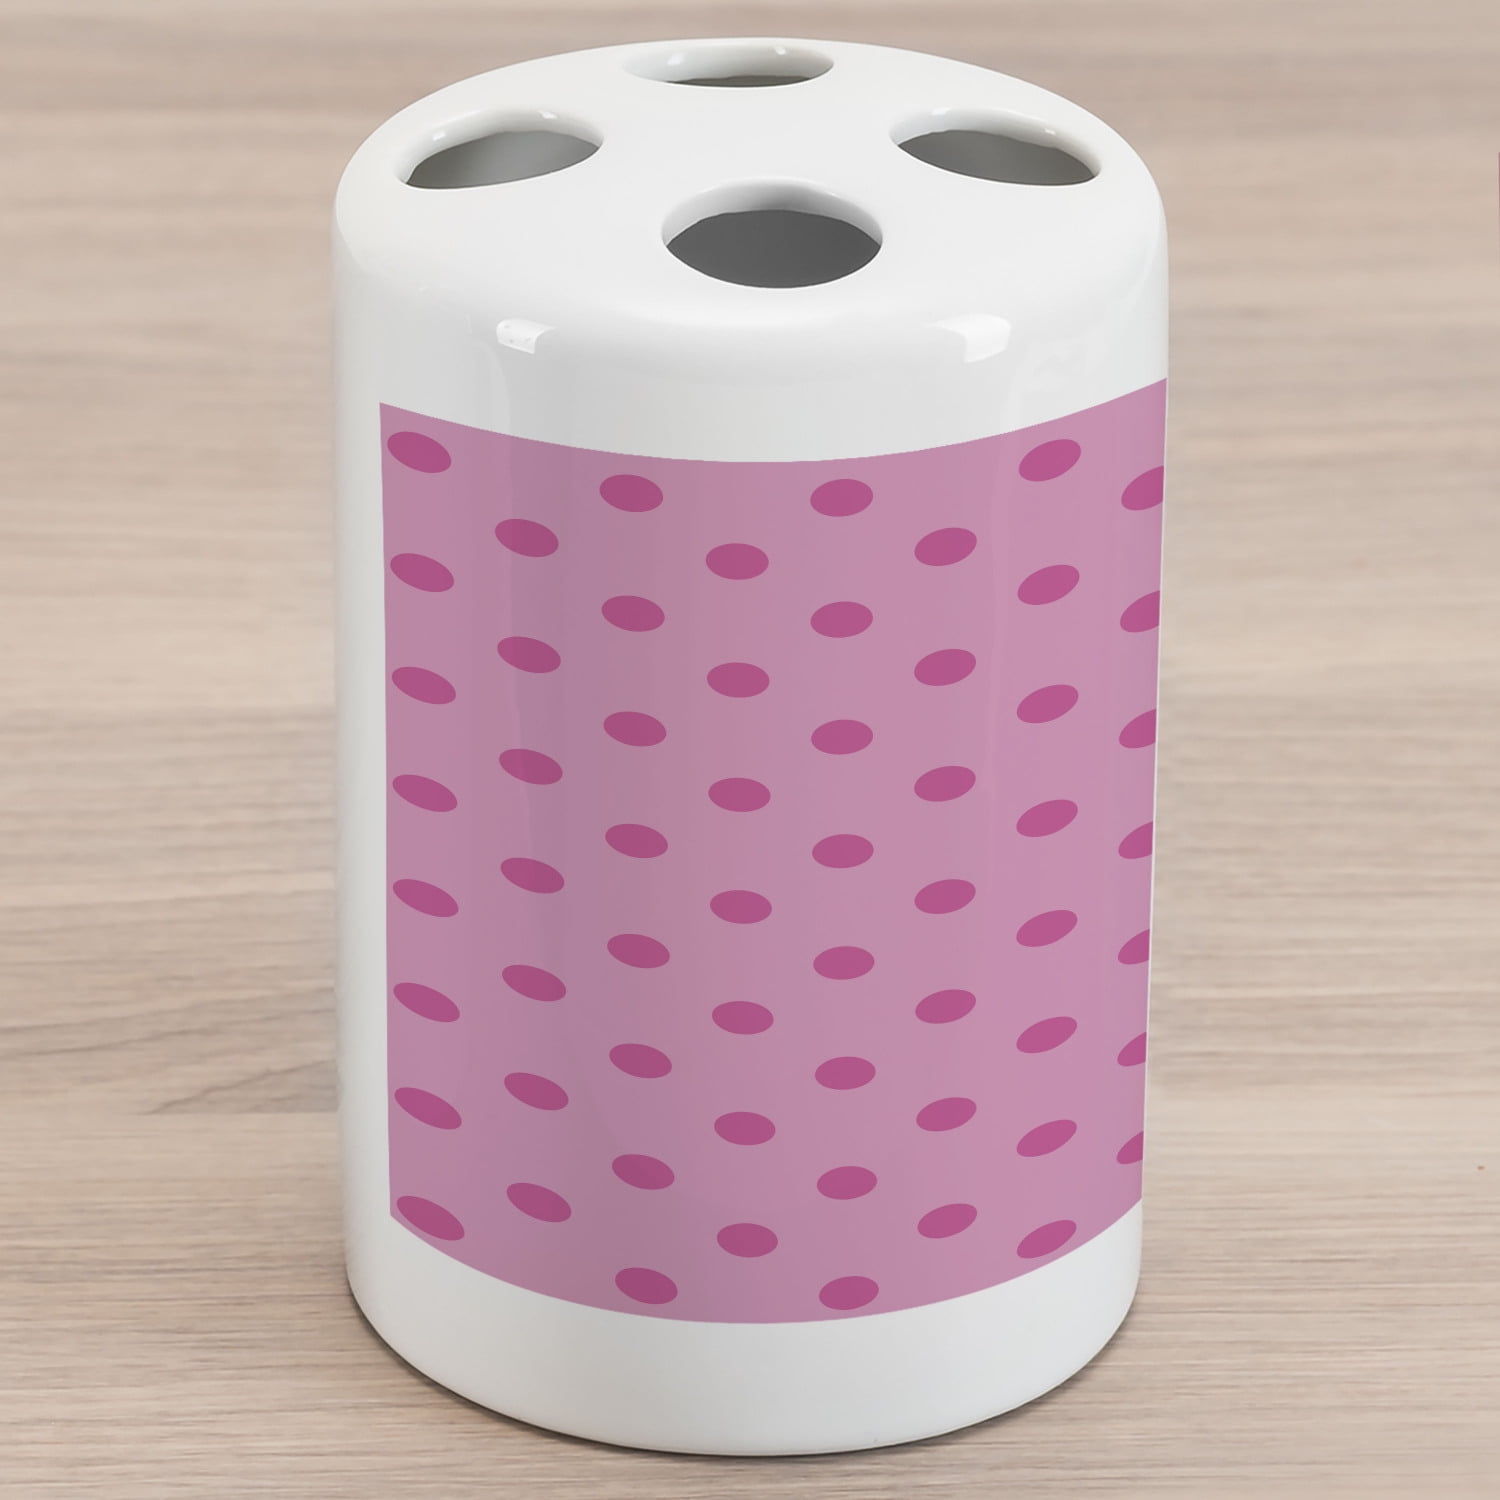 Hot Pink Ceramic Toothbrush Holder, Classical Simplistic Pattern Design  with Small Pink Dots Spots Girlish Style, Decorative Versatile Countertop  for Bathroom, 4.5